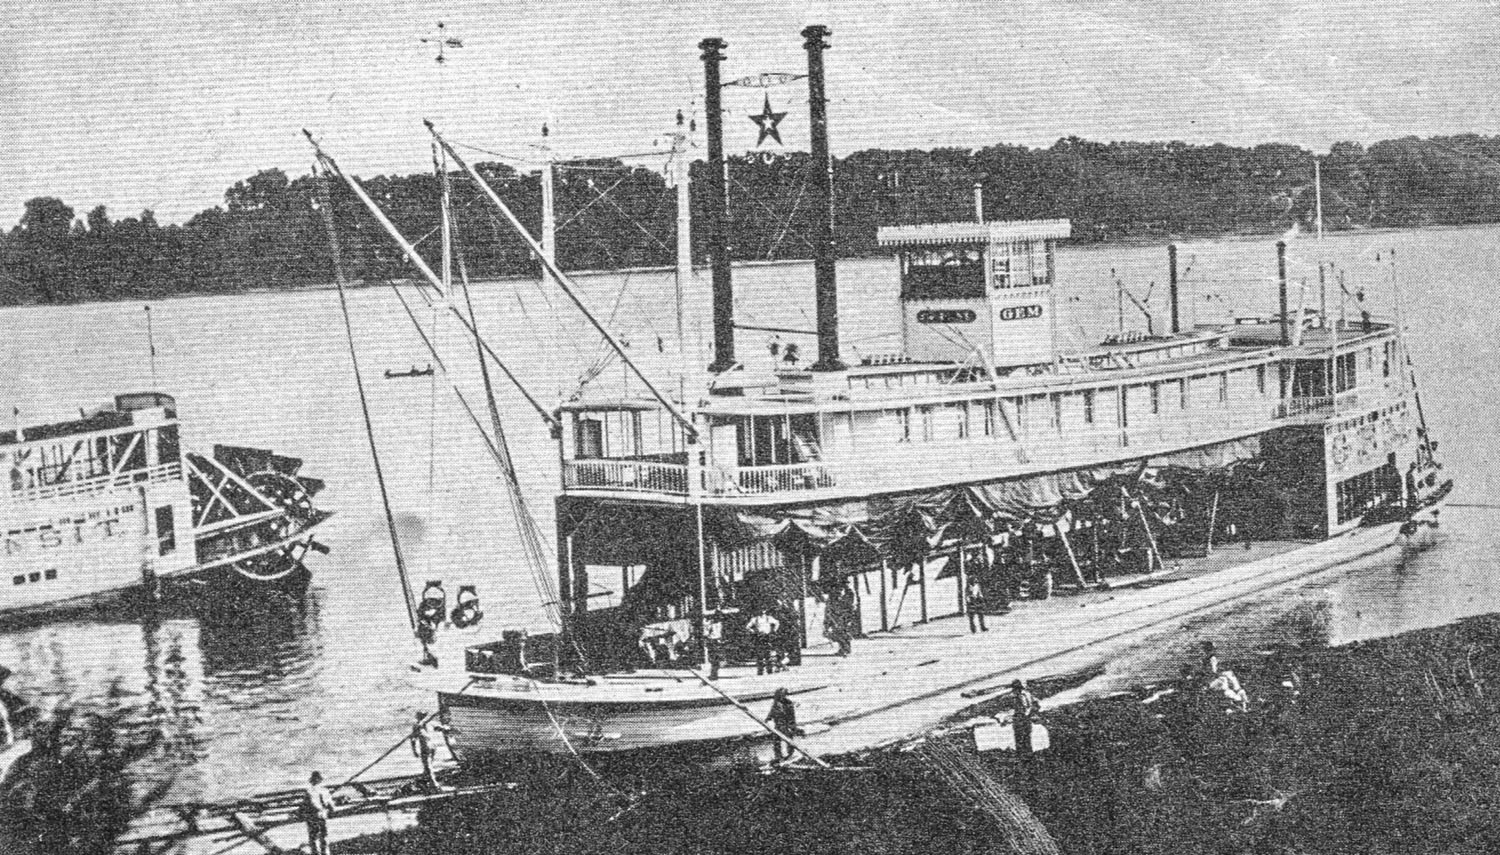 The Gem as a new boat at the Howard Shipyard in 1898. The stern of the towboat Transit shows at left. (Photo courtesy of the Howard Steamboat Museum)